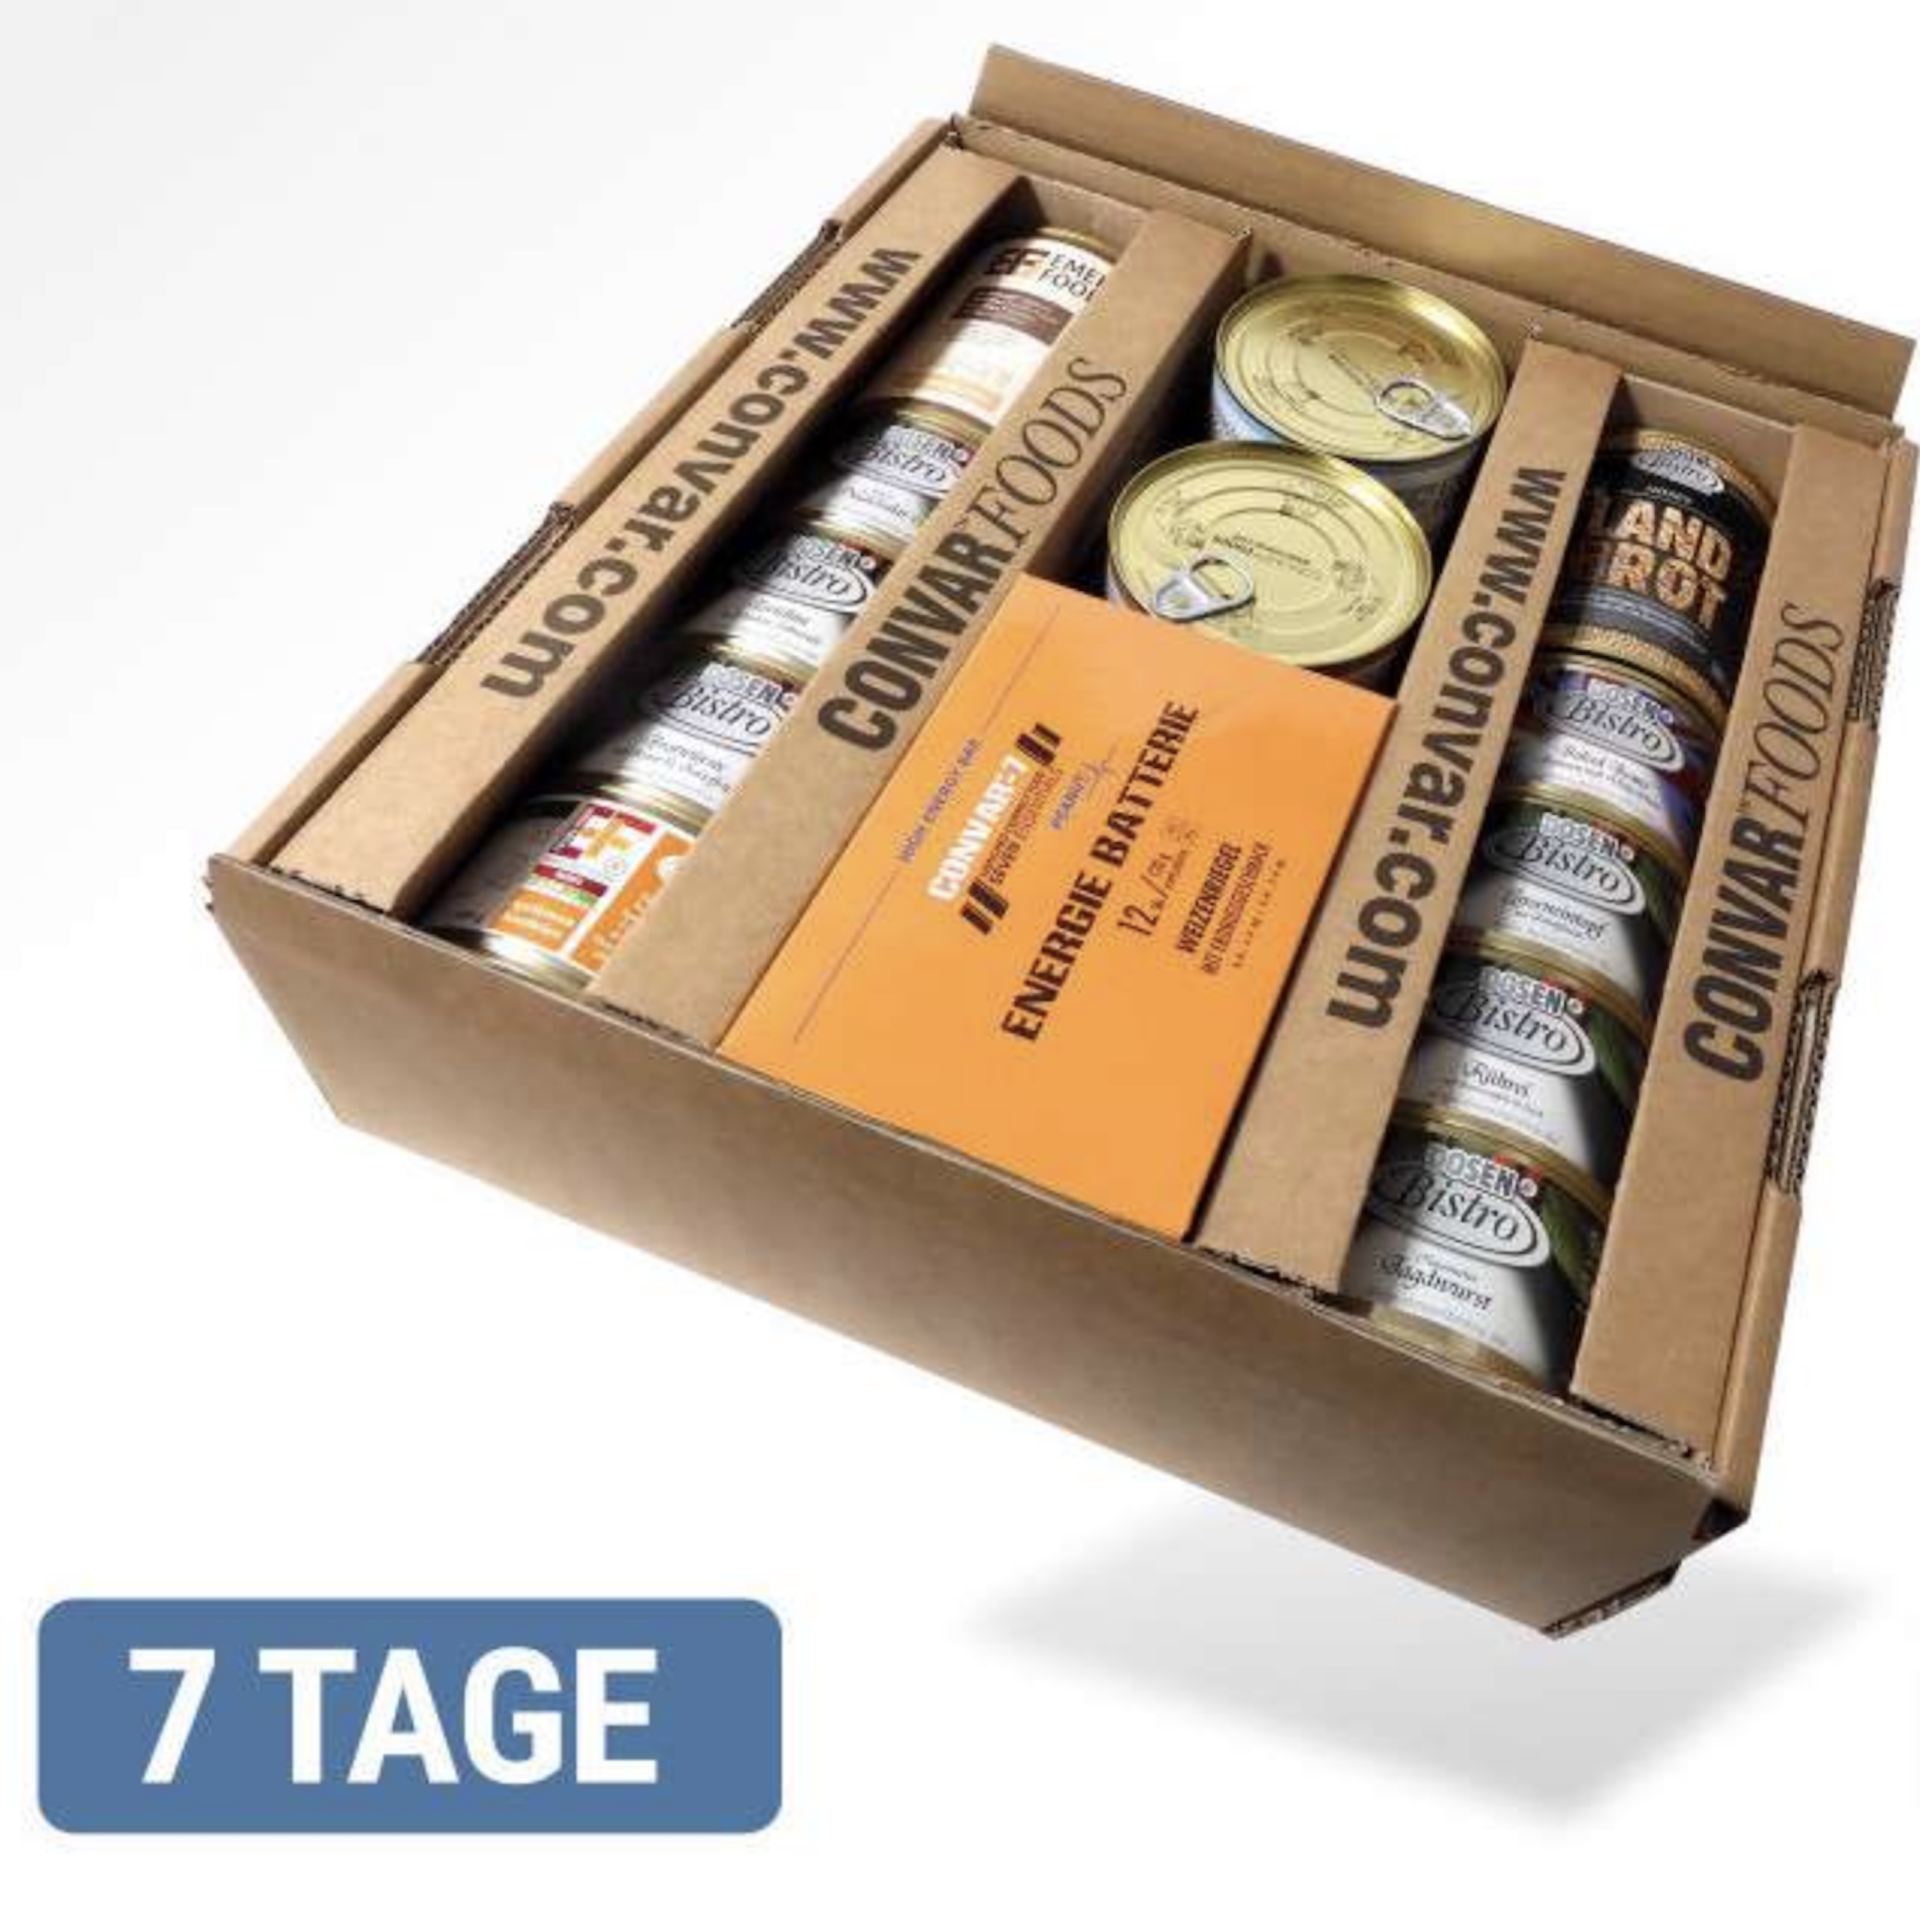 CONVAR FOODS - 7 Tage All-in-One Variante 2